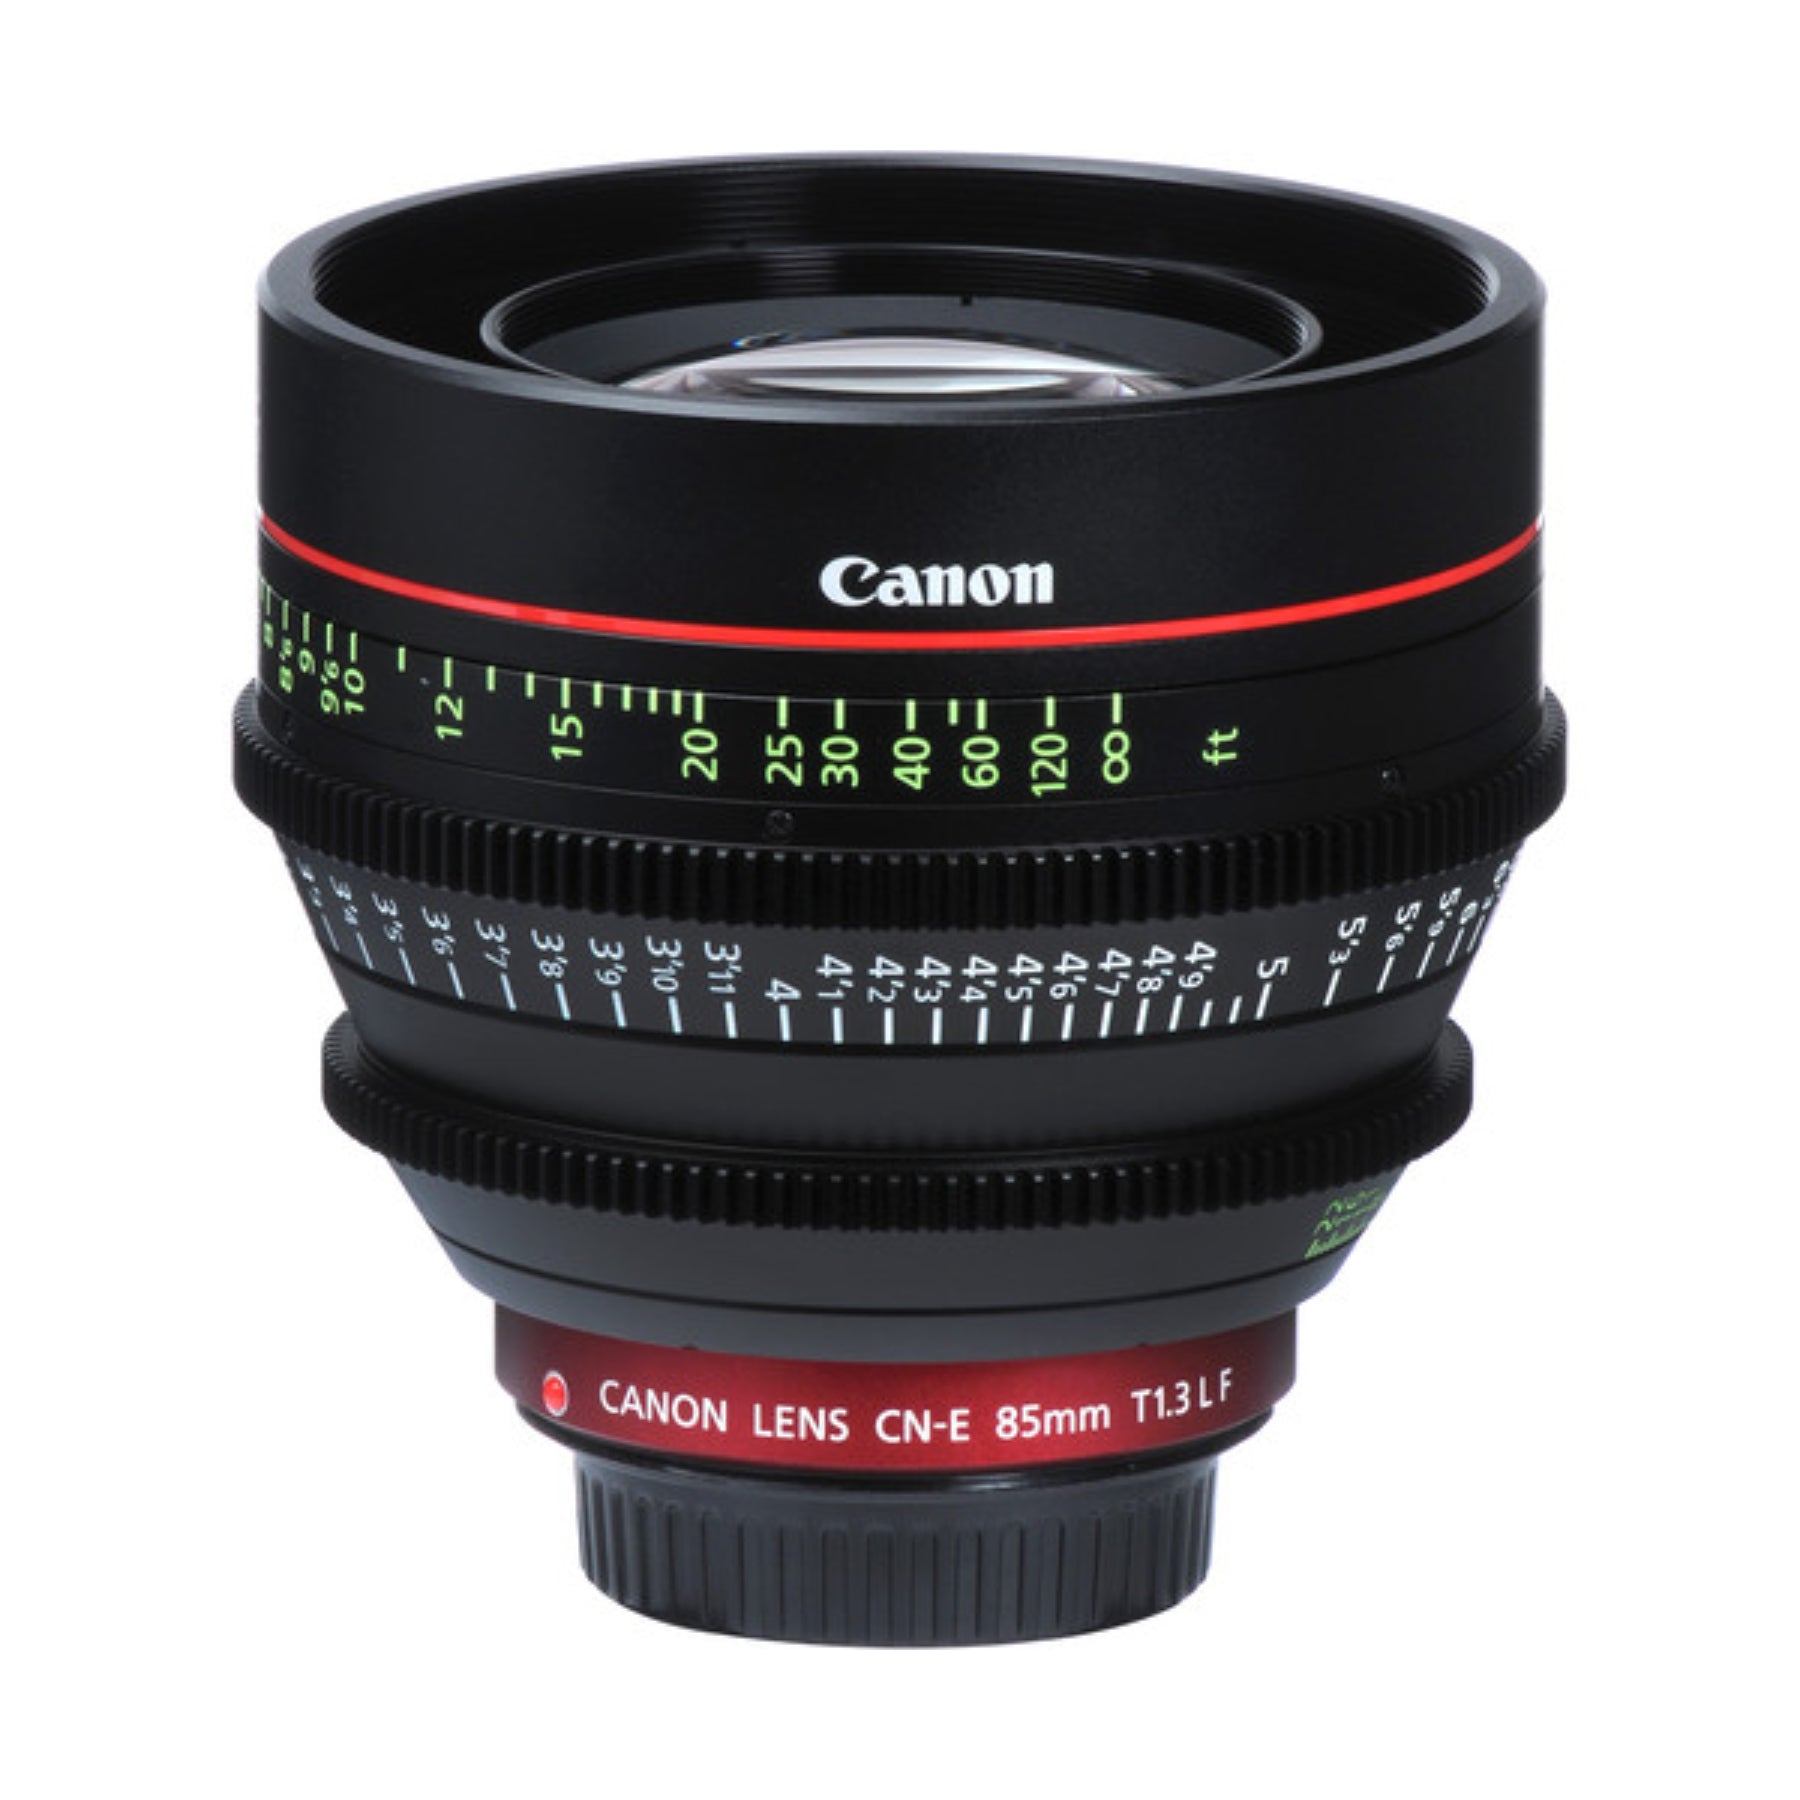 Canon CN-E 85mm T 1.3 EF lens for hire